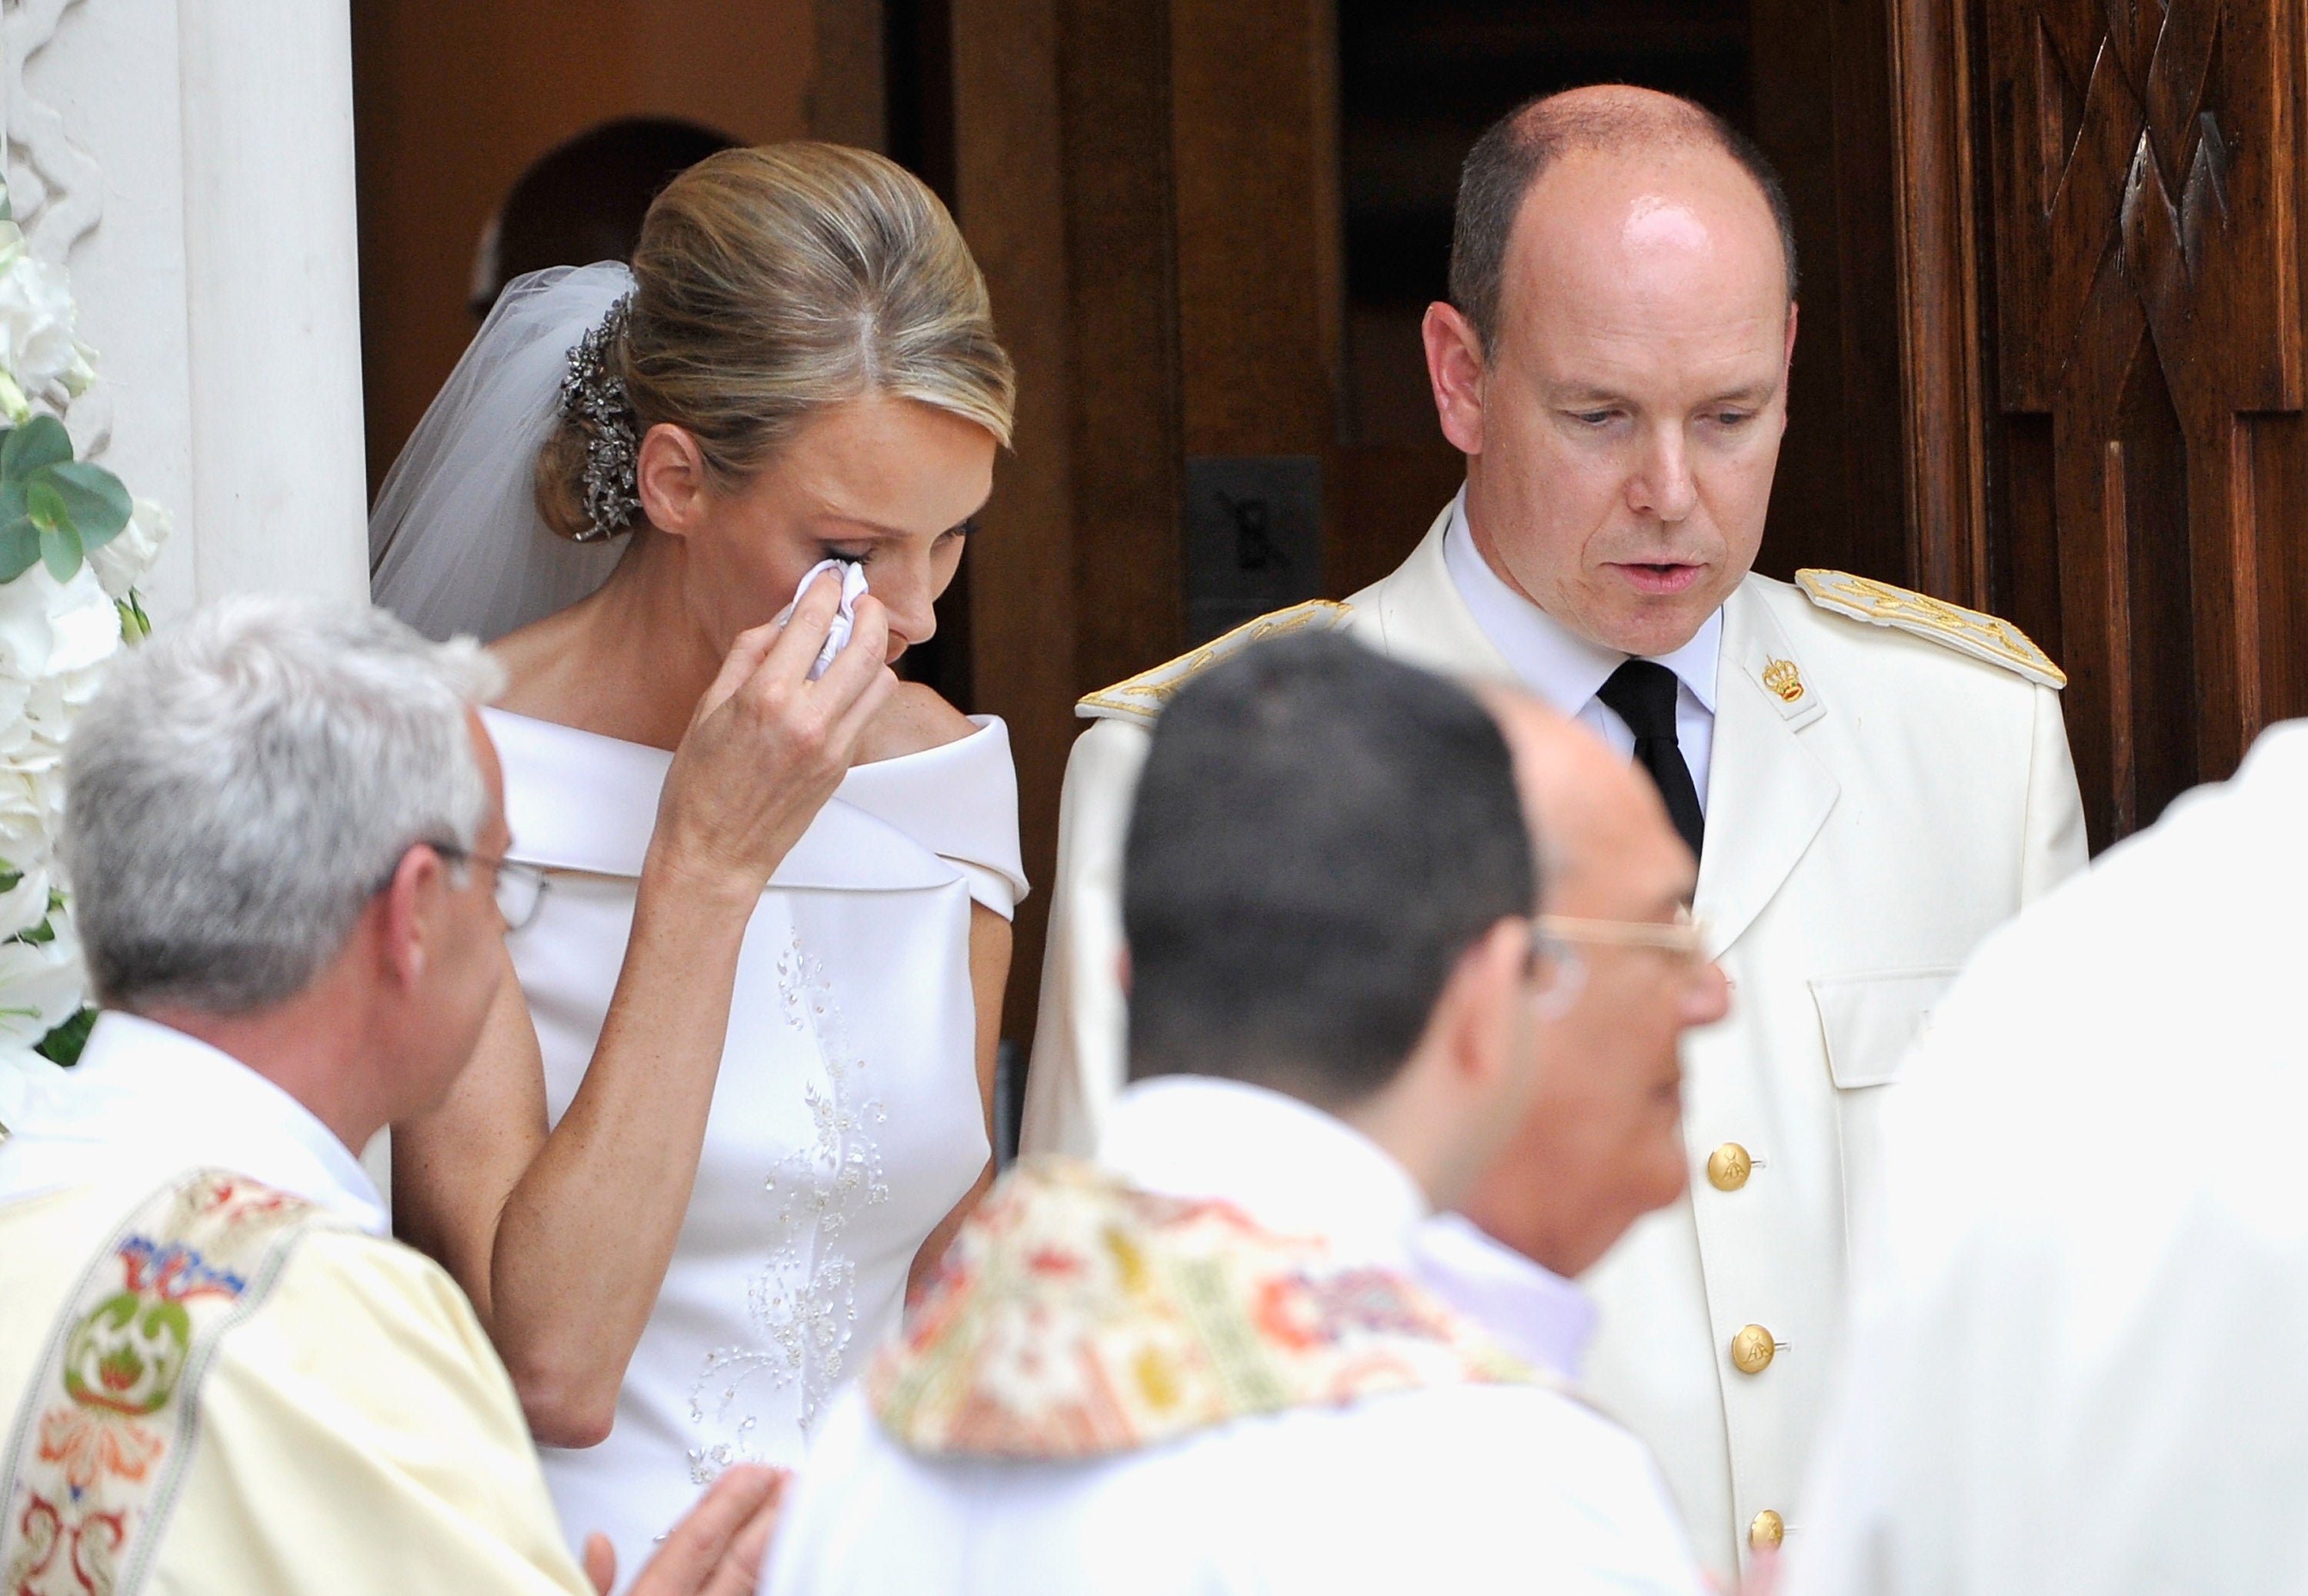 Charlene Wittstock was ‘overwhelmed’ with emotion at her wedding